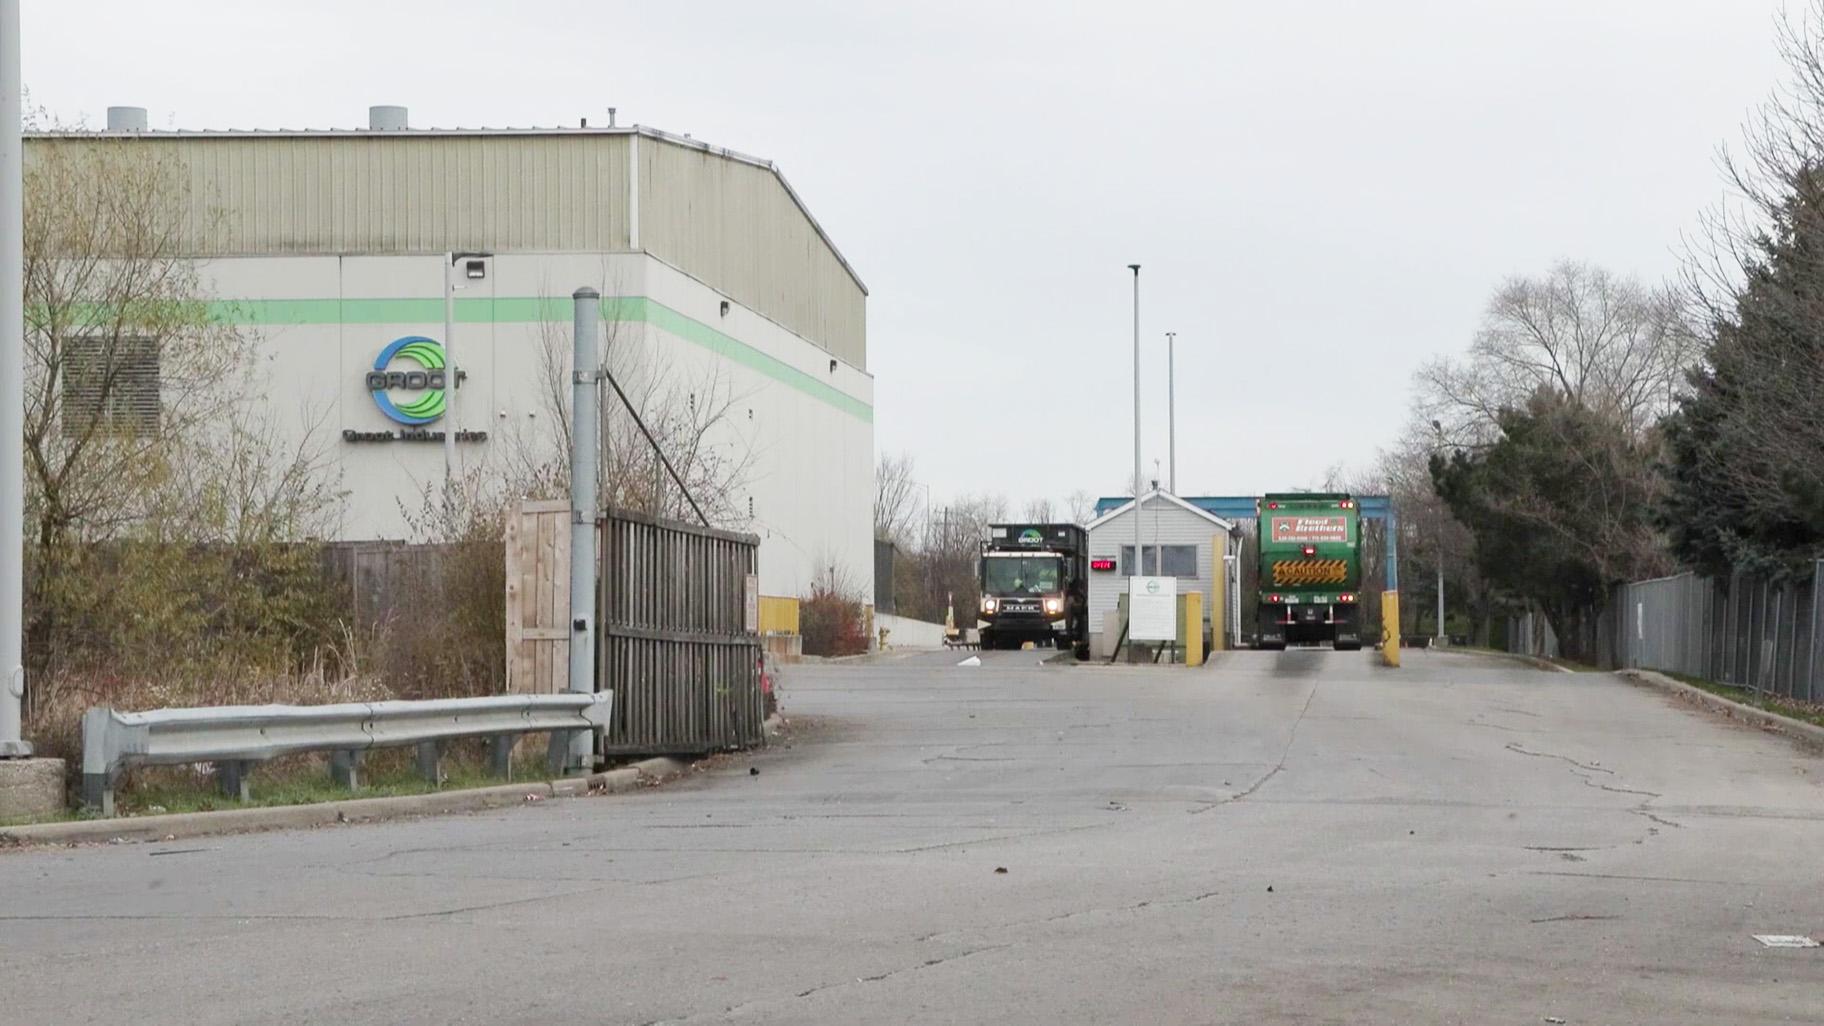 Groot Industries operates a waste facility in West Chicago at 1995 Powis Road.